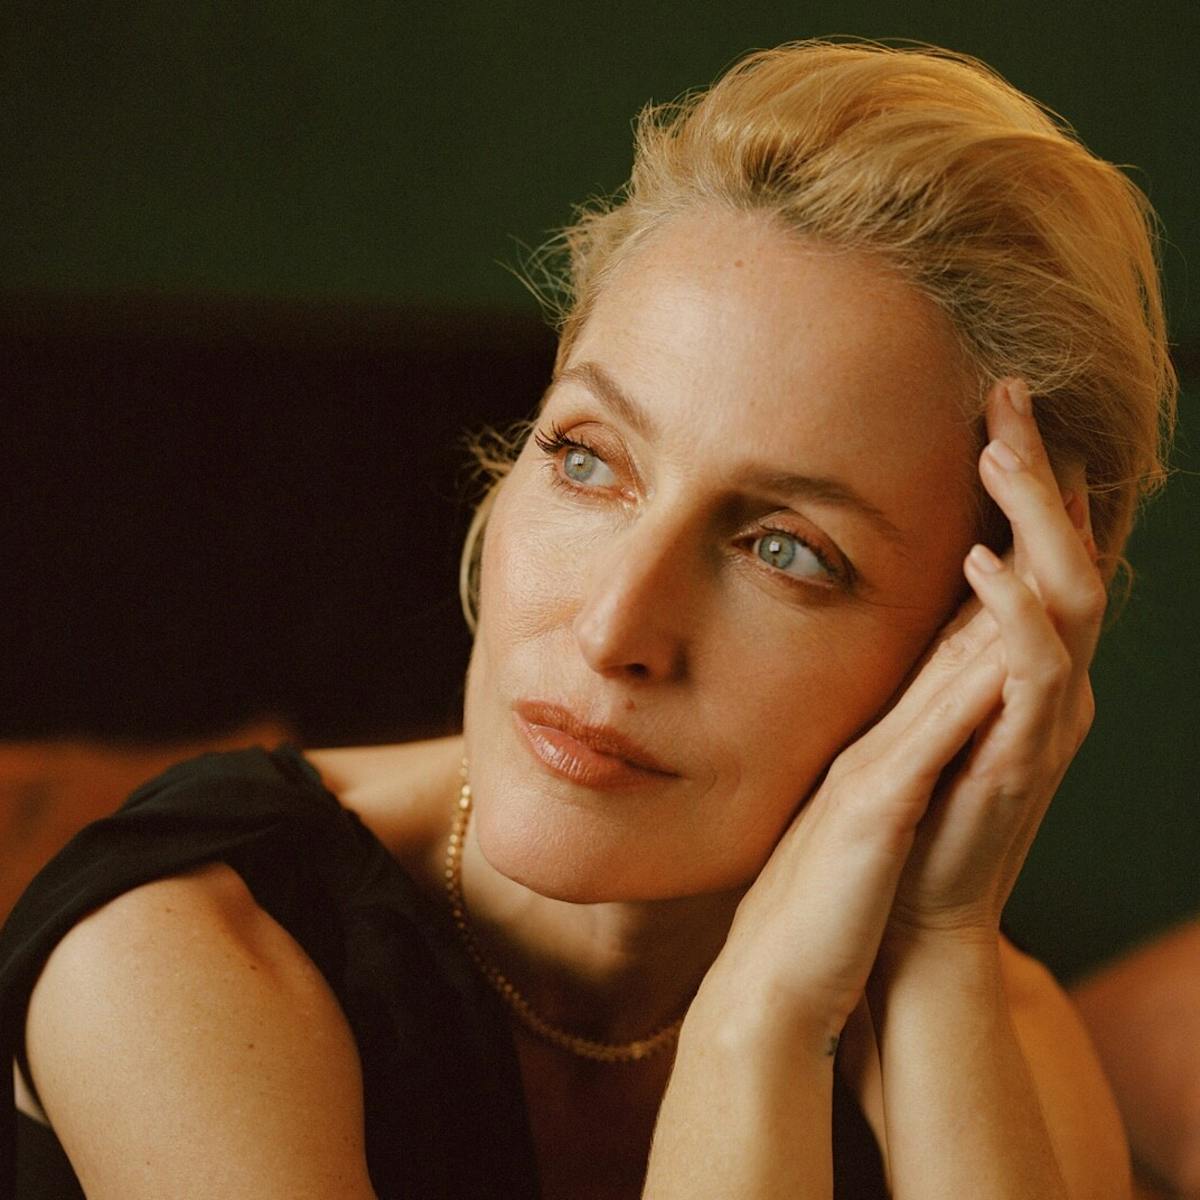 Gillian Anderson rests her head against her hands. She wears a black top and gold necklace and looks at something in the distance.